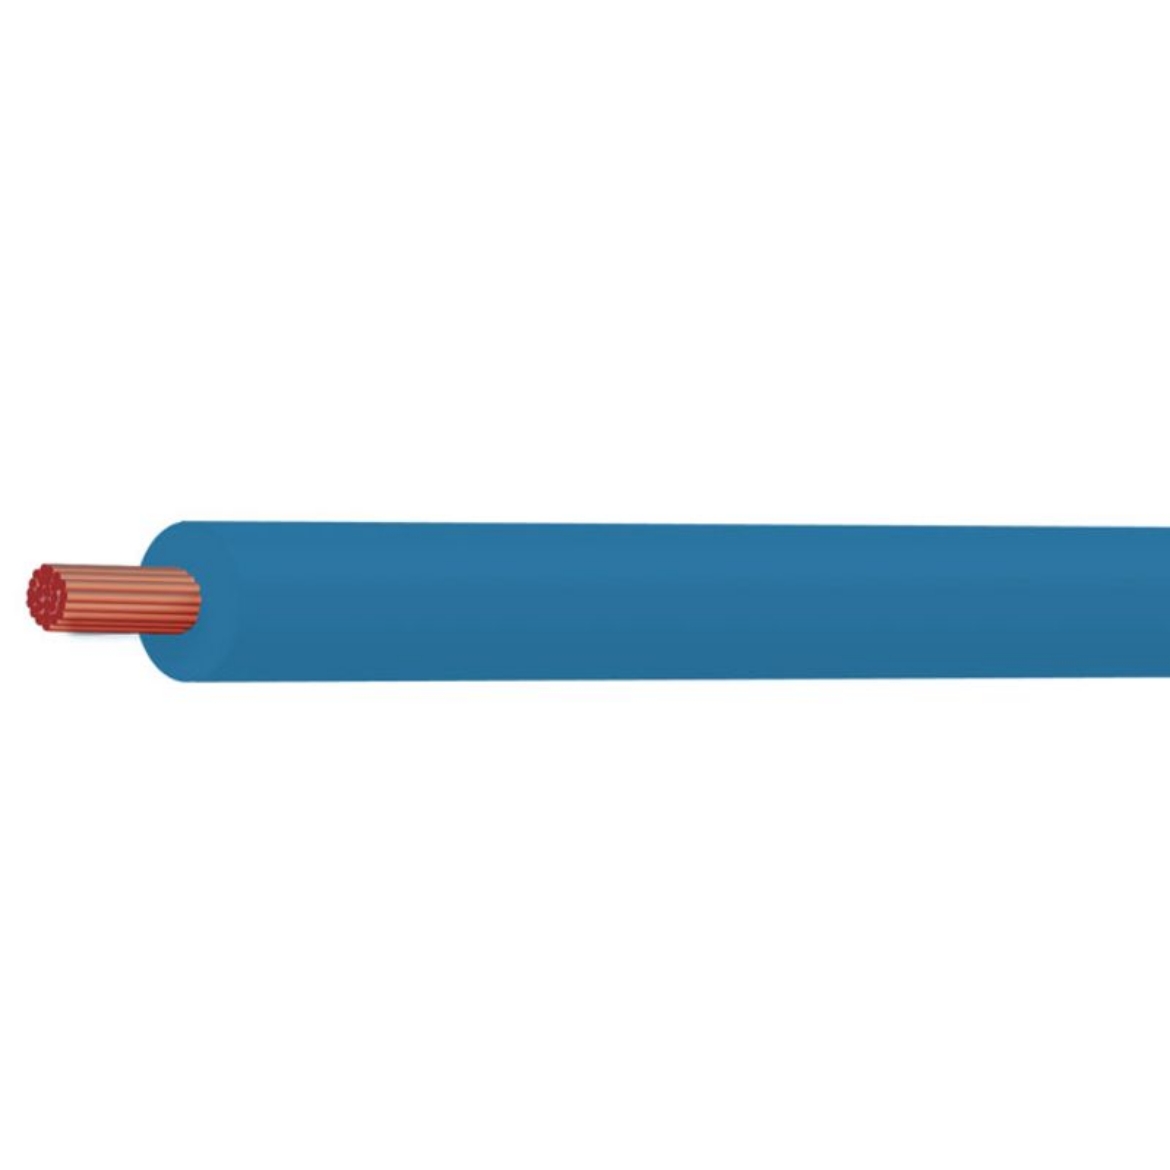 Picture of TYCAB 5MM SINGLE CORE CABLE 25A BLUE (2.9 SQ) - 100M ROLL